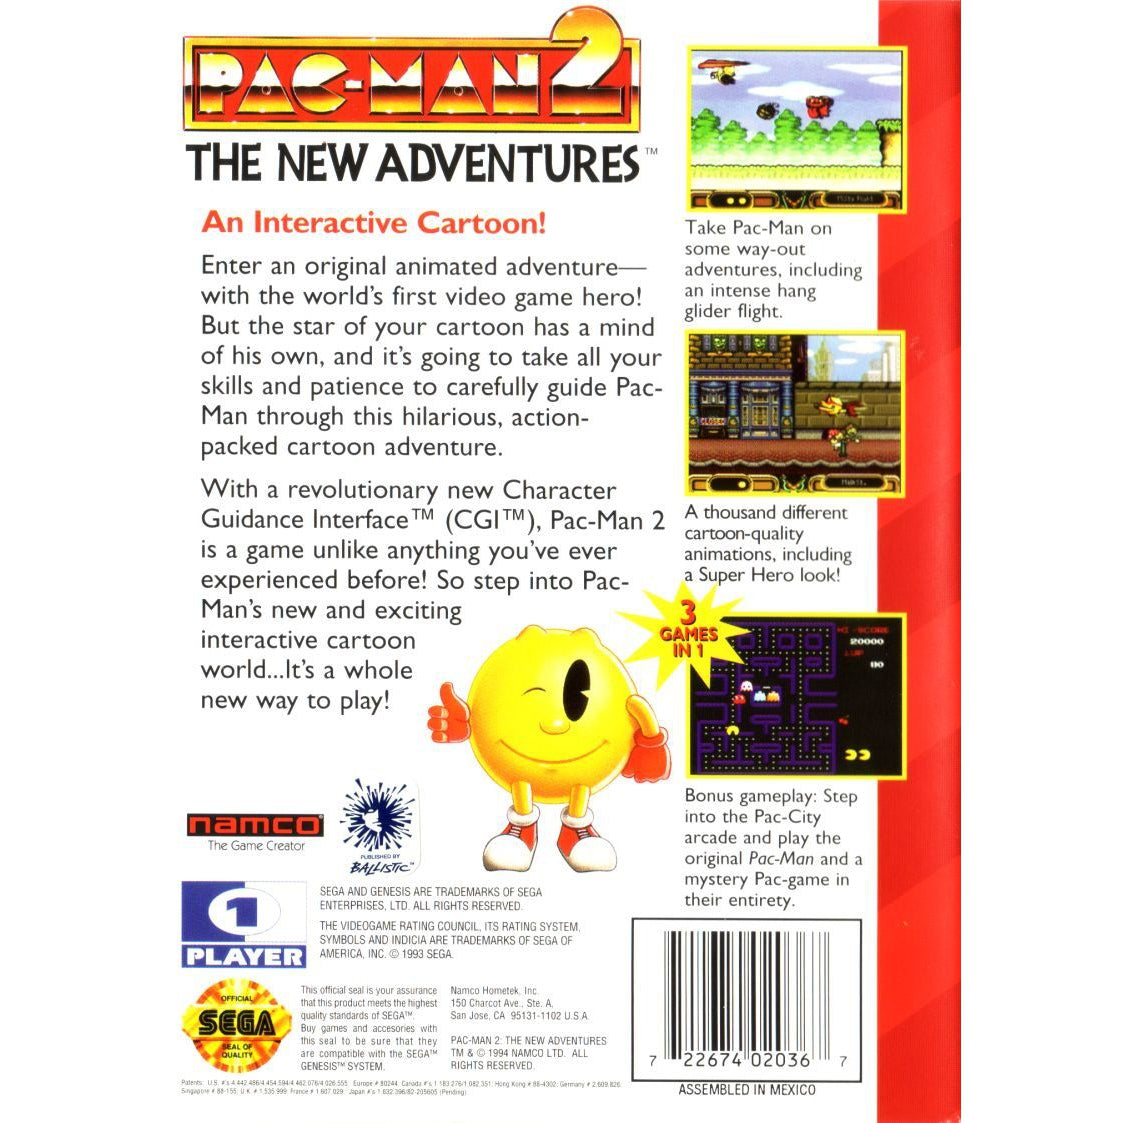 Pac-Man 2: The New Adventures - Sega Genesis Game Complete - YourGamingShop.com - Buy, Sell, Trade Video Games Online. 120 Day Warranty. Satisfaction Guaranteed.